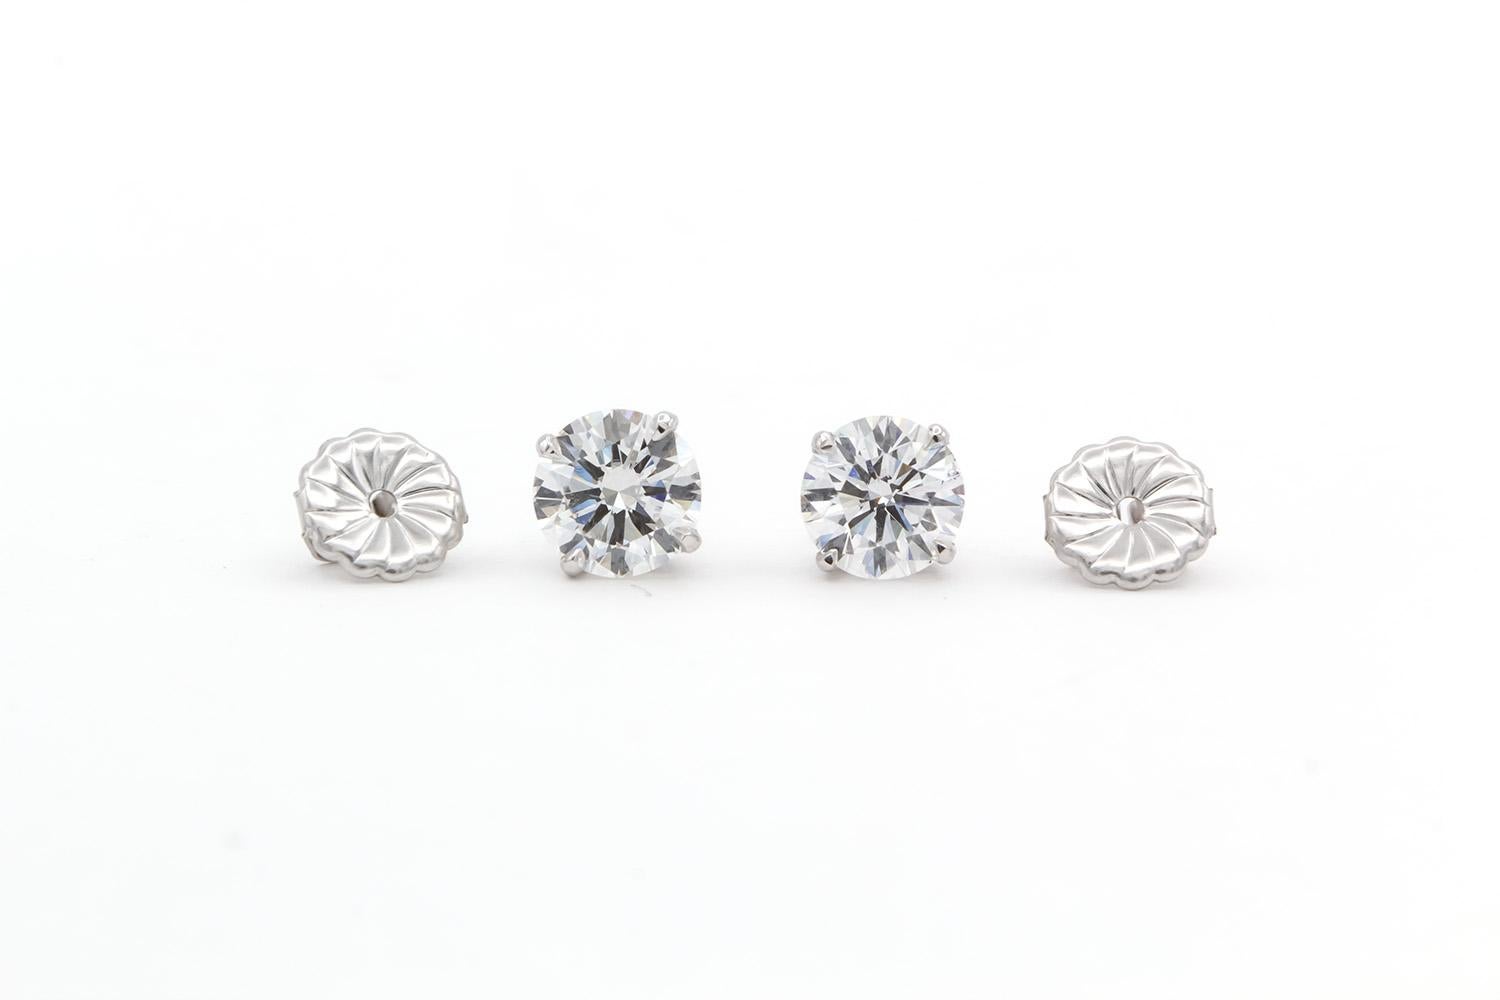 We are pleased to present these GIA Certified 14k White Gold & Round Brilliant Cut Diamond Stud Earrings. These beautiful earrings feature two GIA certified and crown inscribed Diamonds. One 1.16ct F/VS1 Round Brilliant Cut Diamond and one 1.13ct